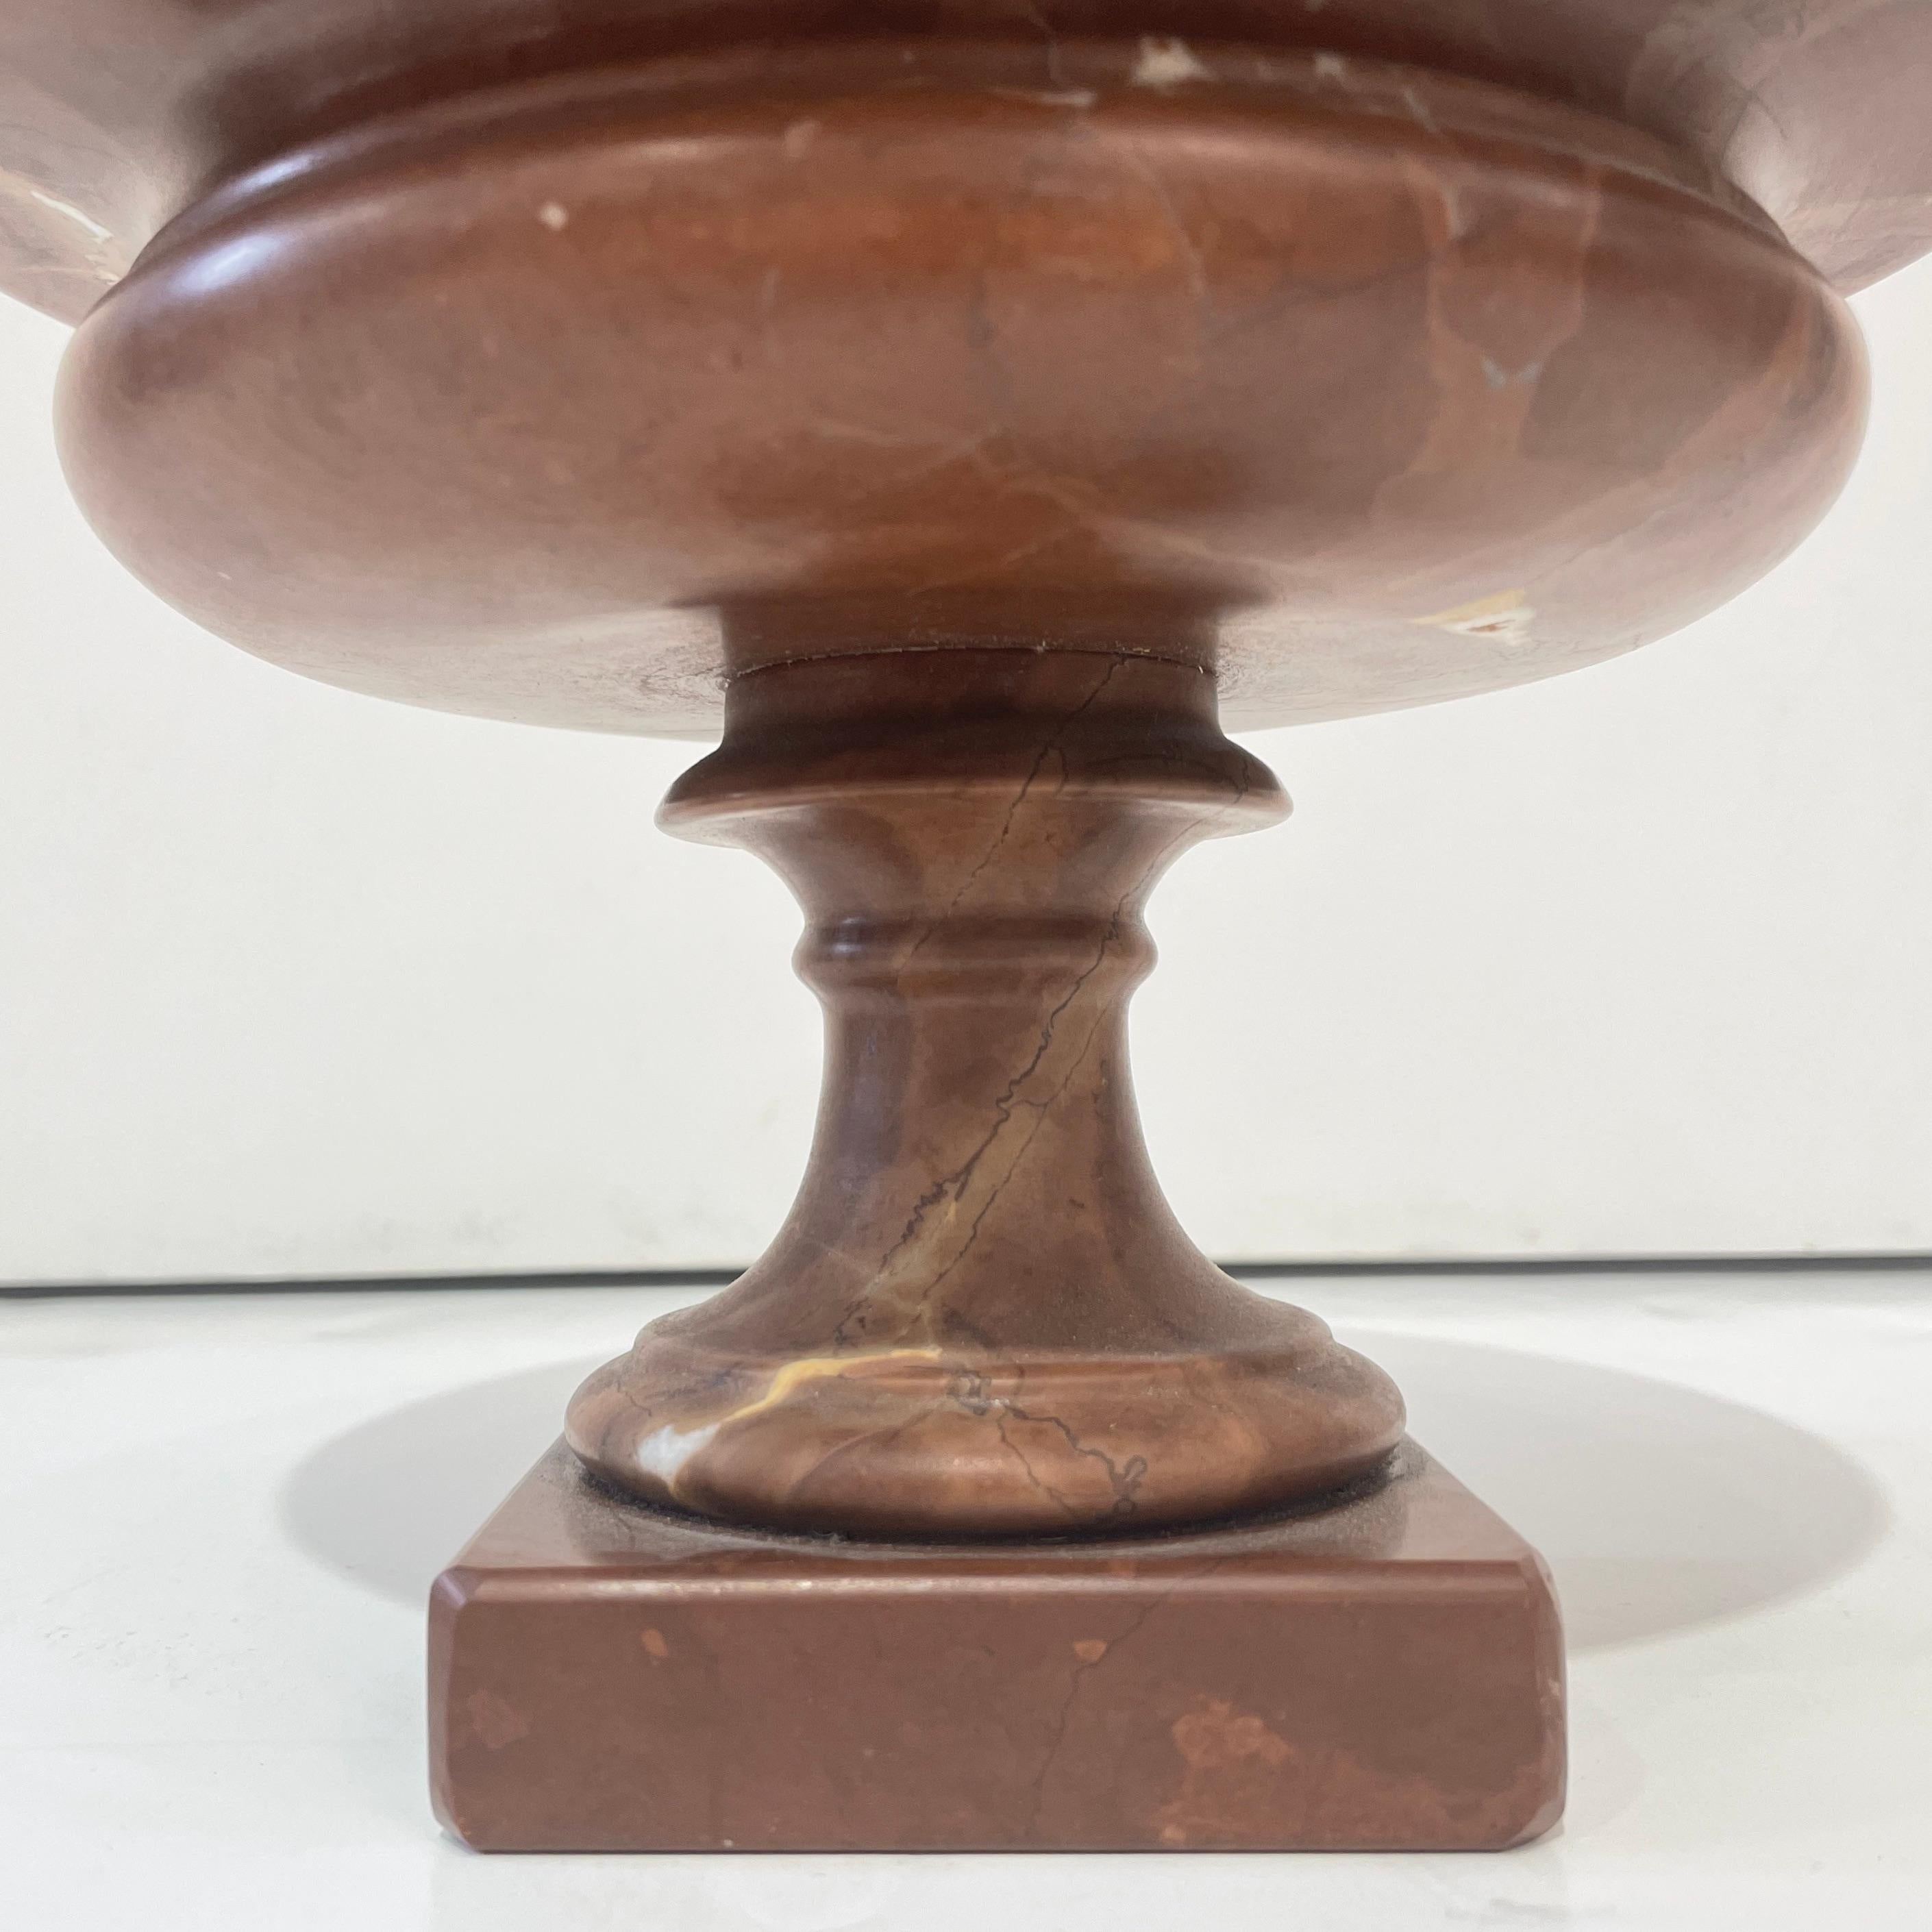 1930s Neoclassical Italian Carved Brown Red Marble Tazza Bowl with White Veins 3